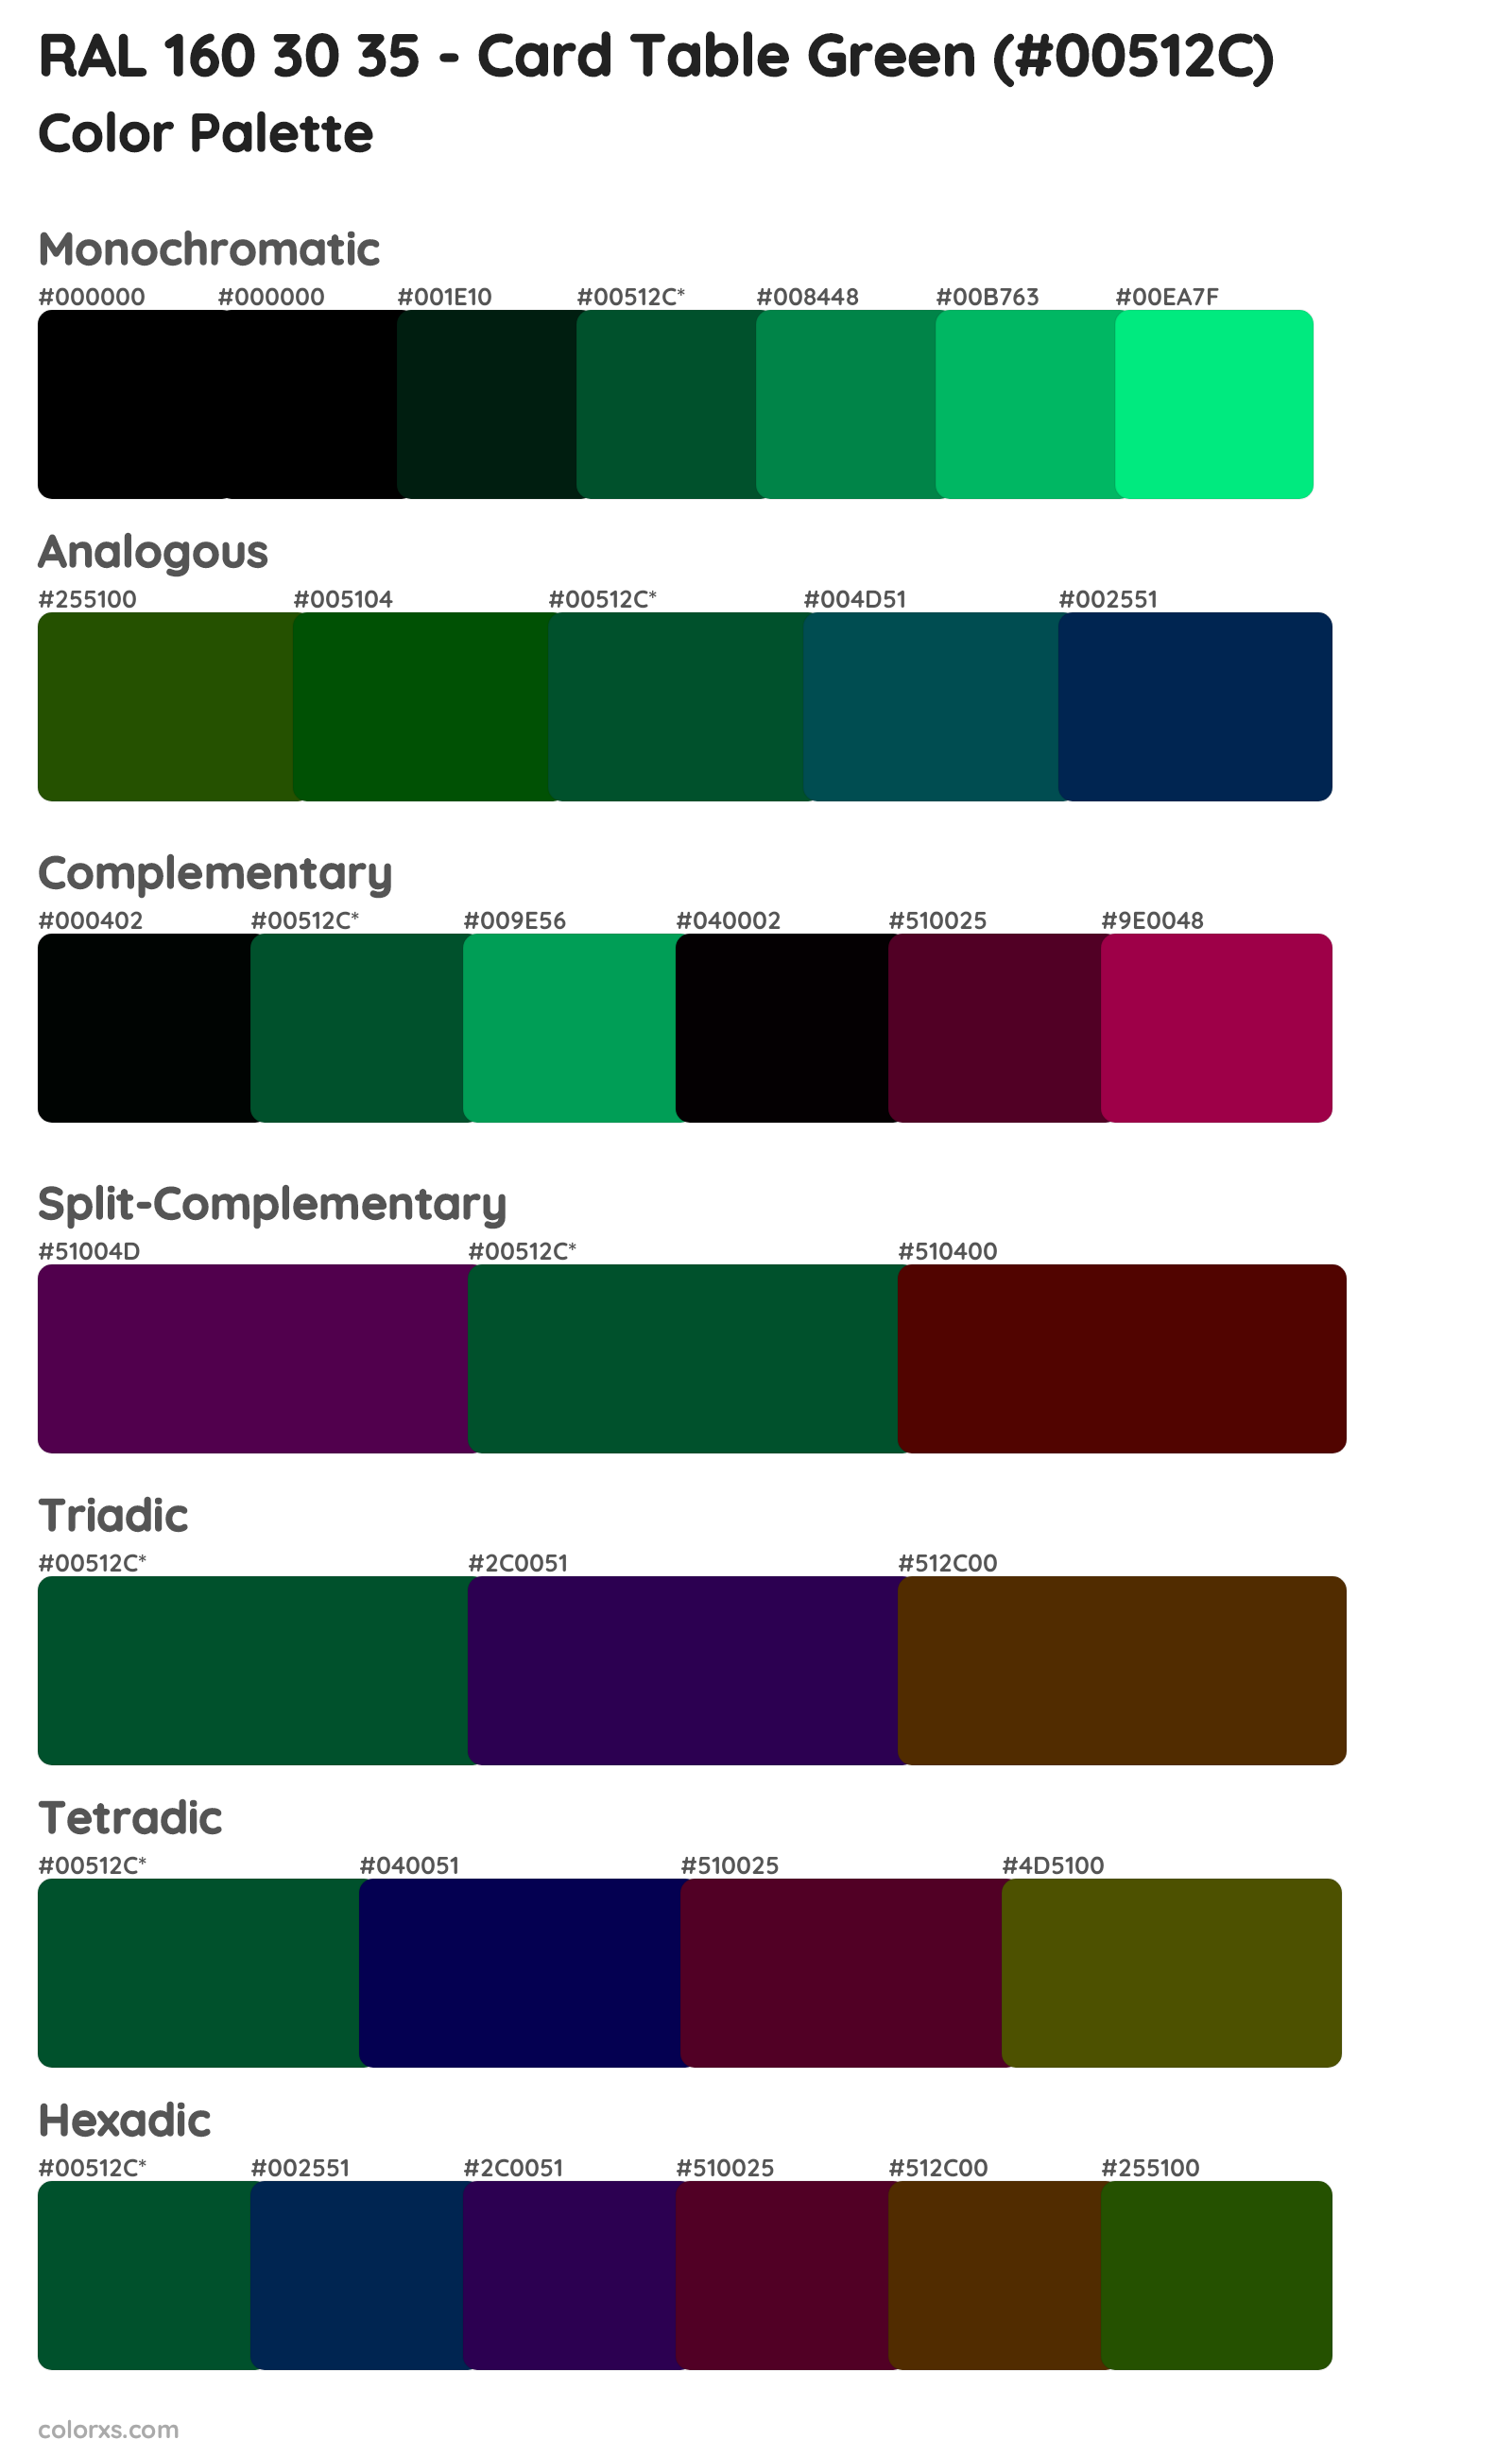 RAL 160 30 35 - Card Table Green Color Scheme Palettes